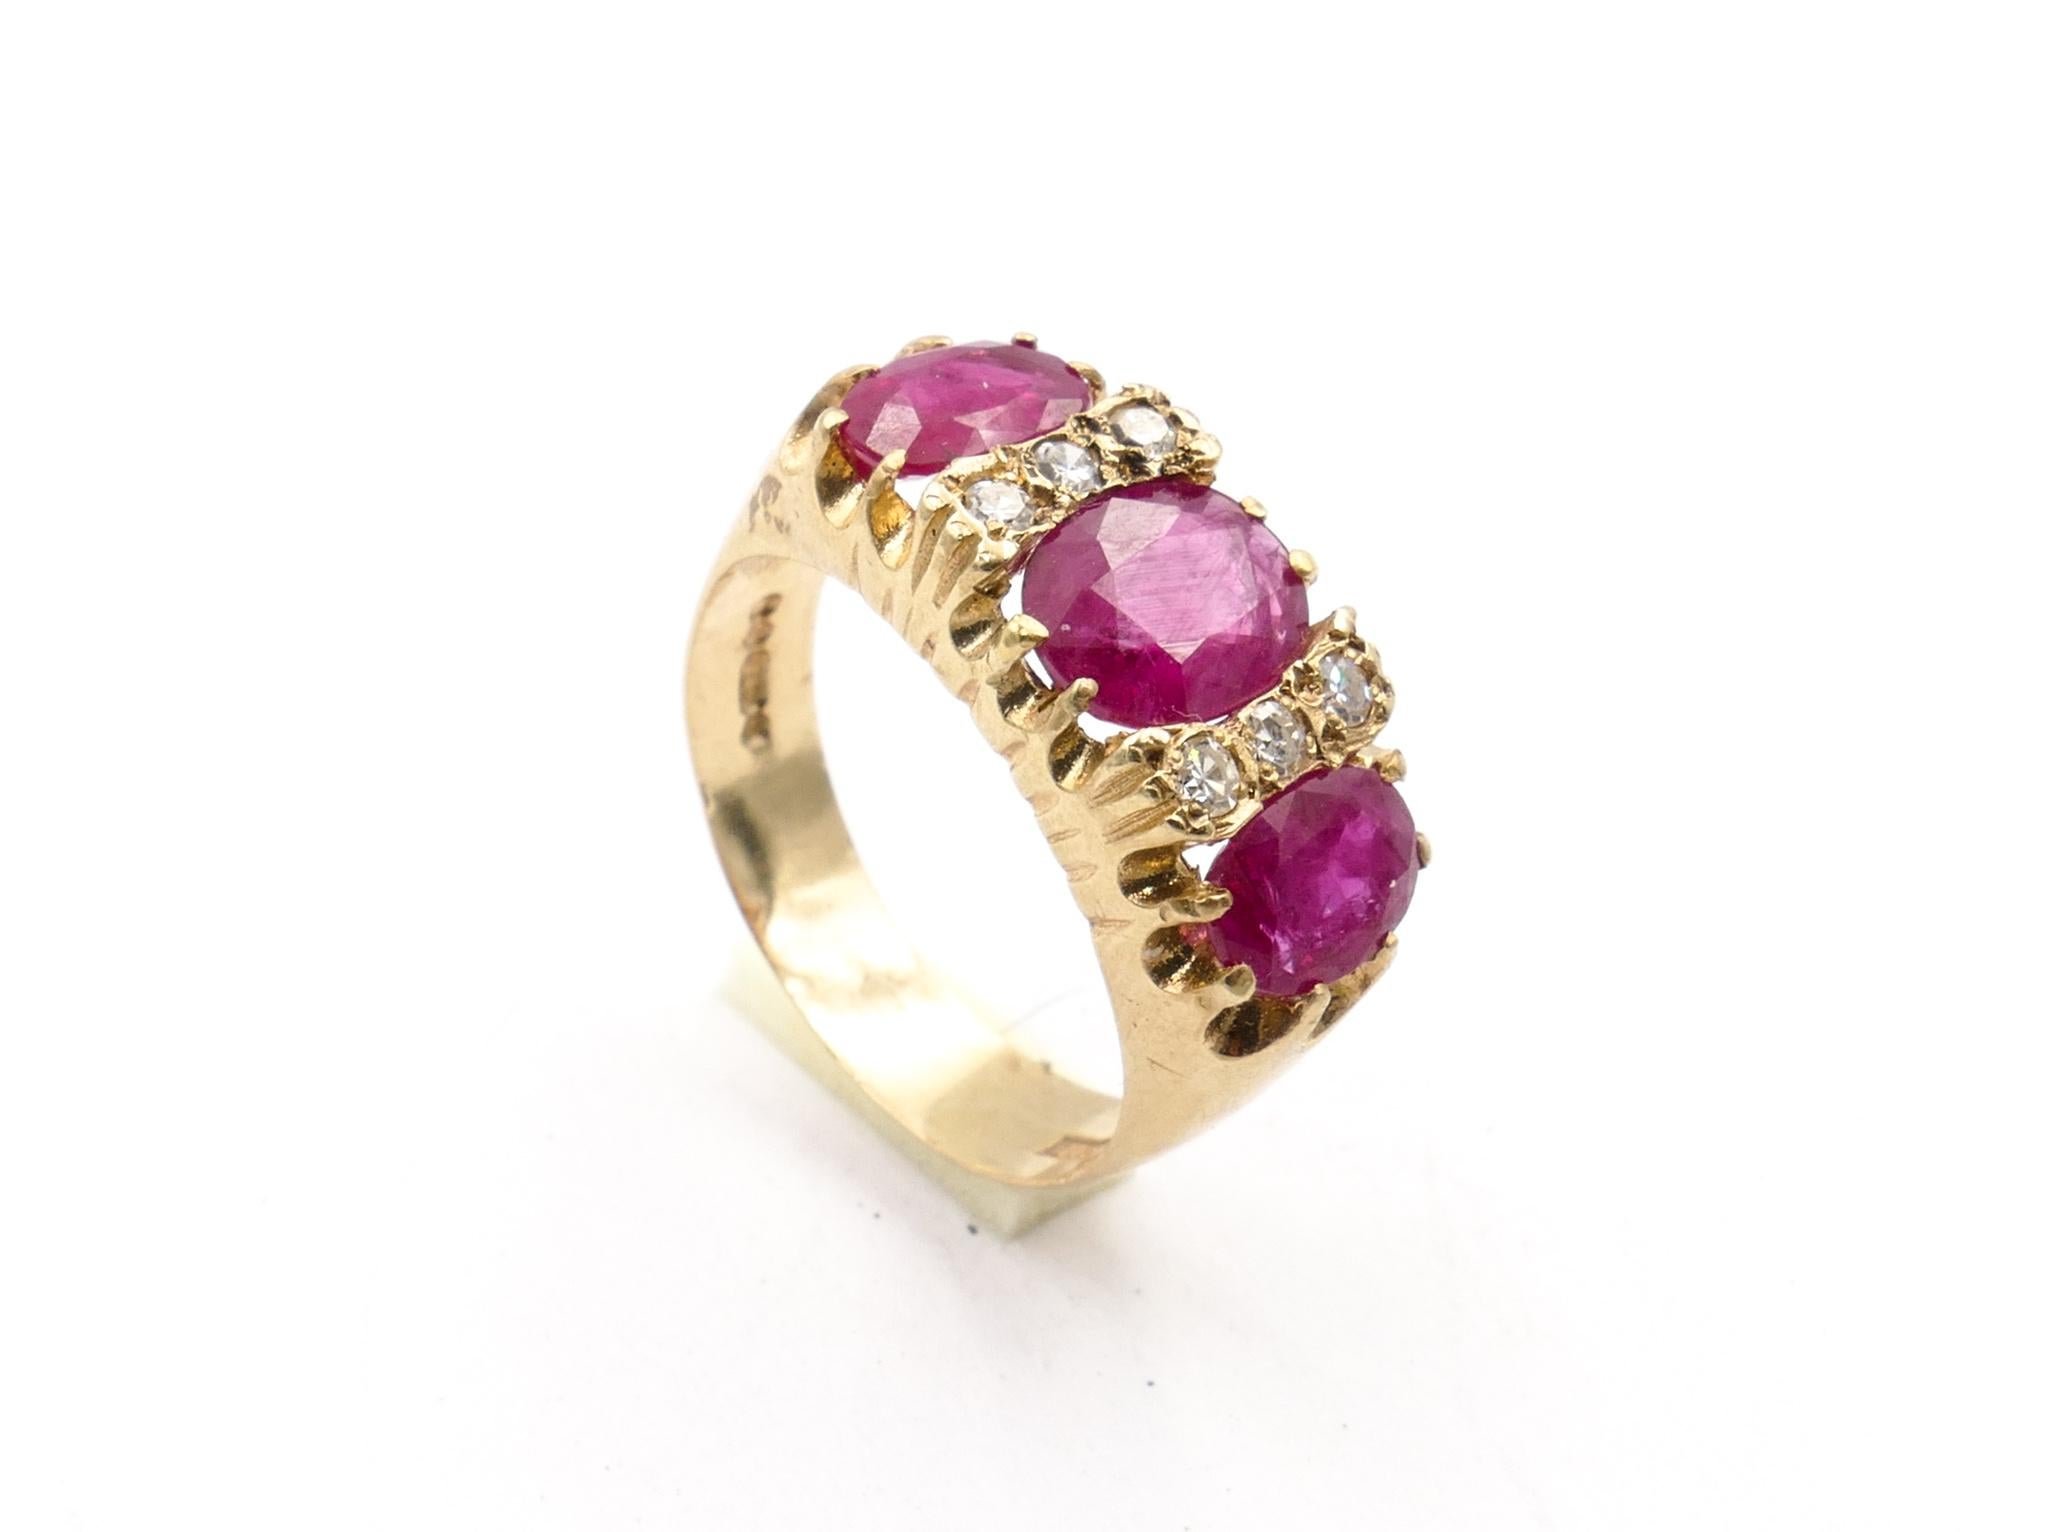 Big, Bold & Beautiful!                                                                                                     

This is one of the Best Ruby Bridge Rings we have had in the Collection.

This particular Ring looks even better 'in the